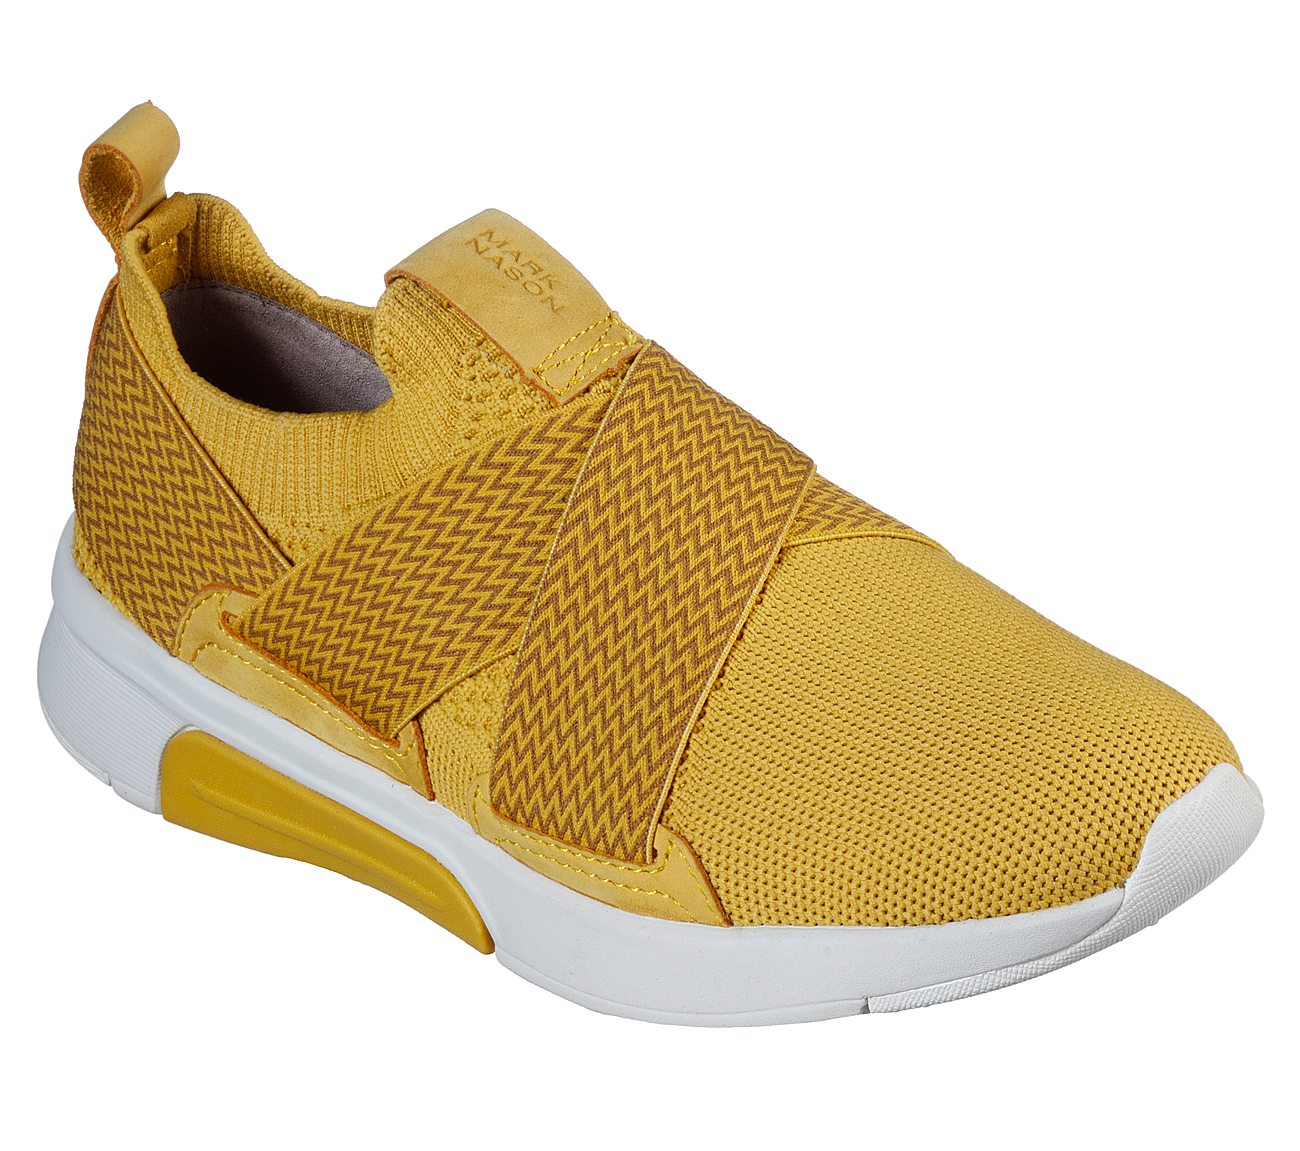 MODERN JOGGER - ZIGGY, YELLOW Footwear Lateral View